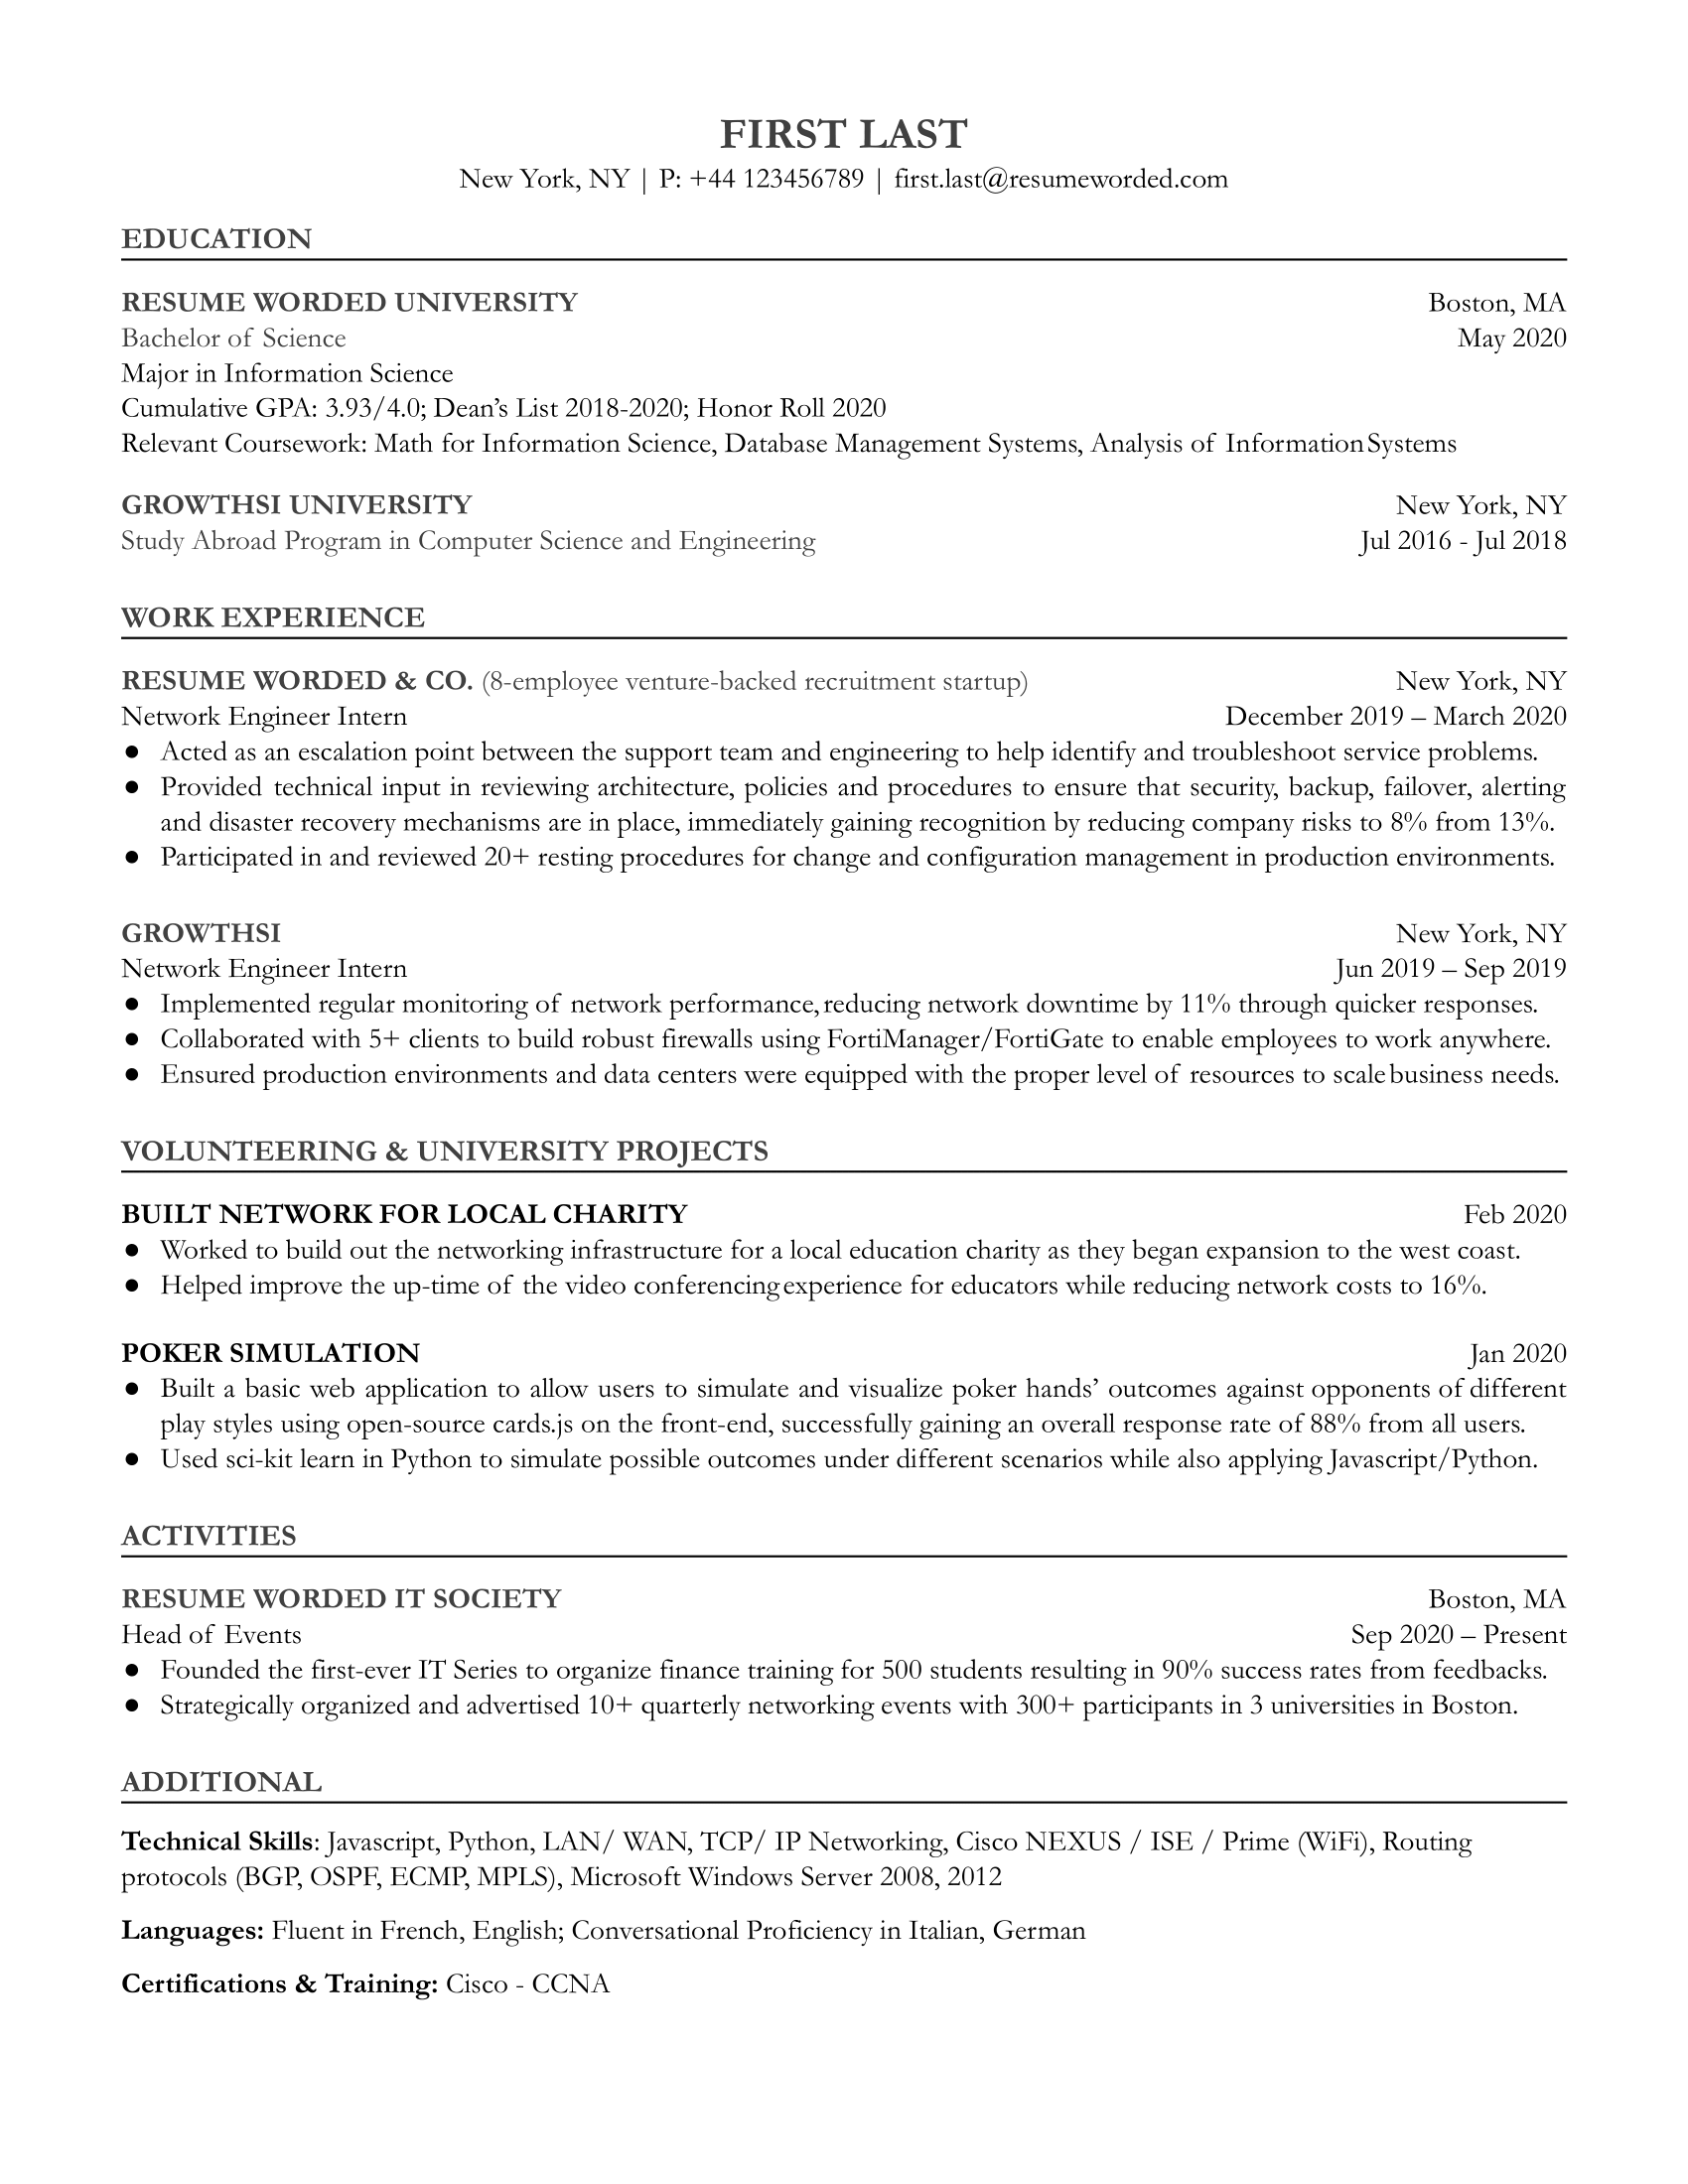 A CV screenshot for an Entry Level Network Engineer position.